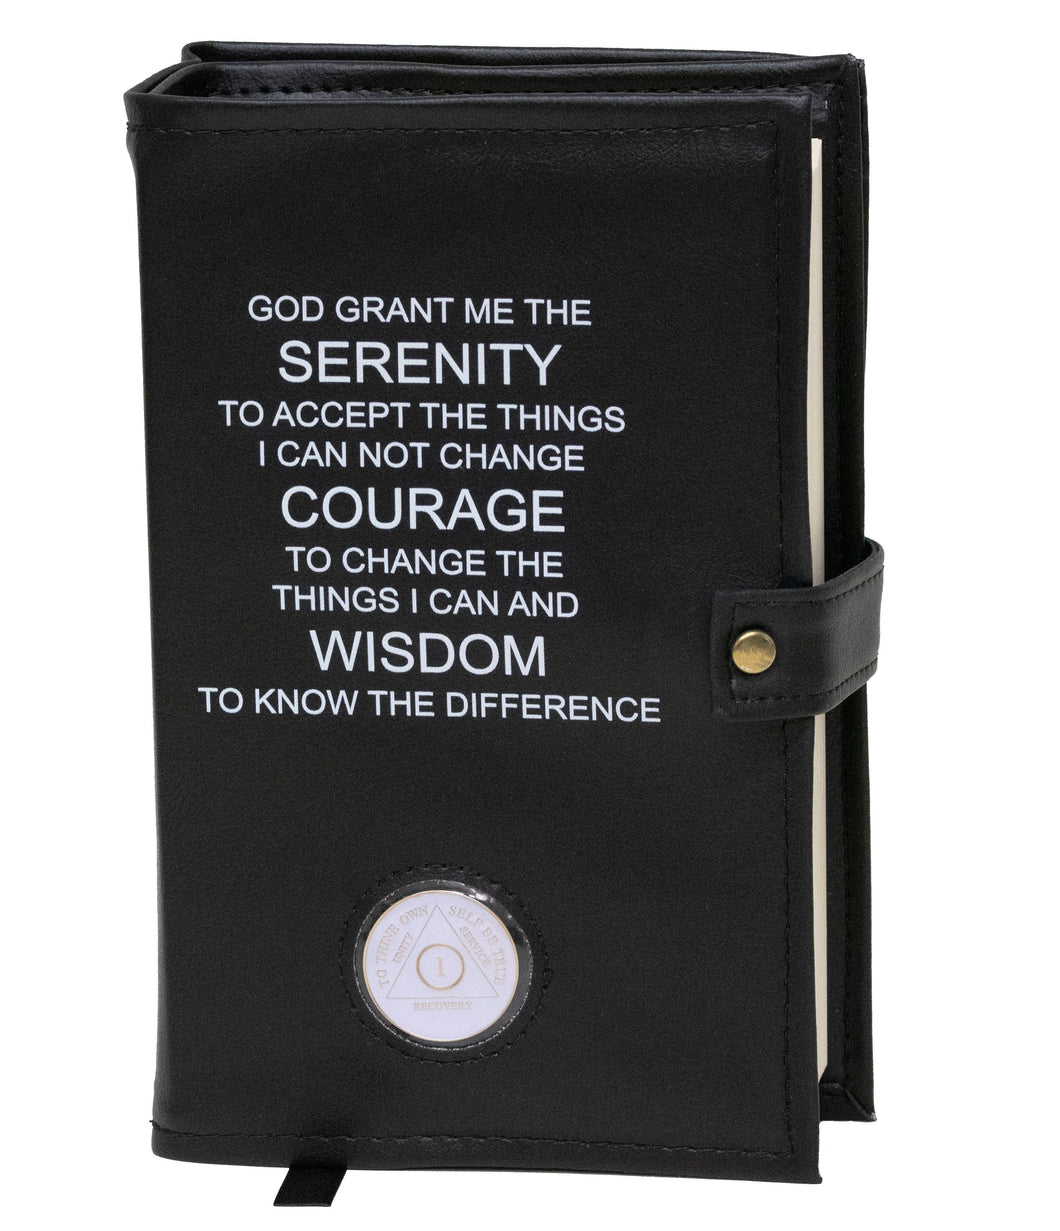 AA Black Double Book Cover With The Serenity Prayer, With Sobriety Chip Holder